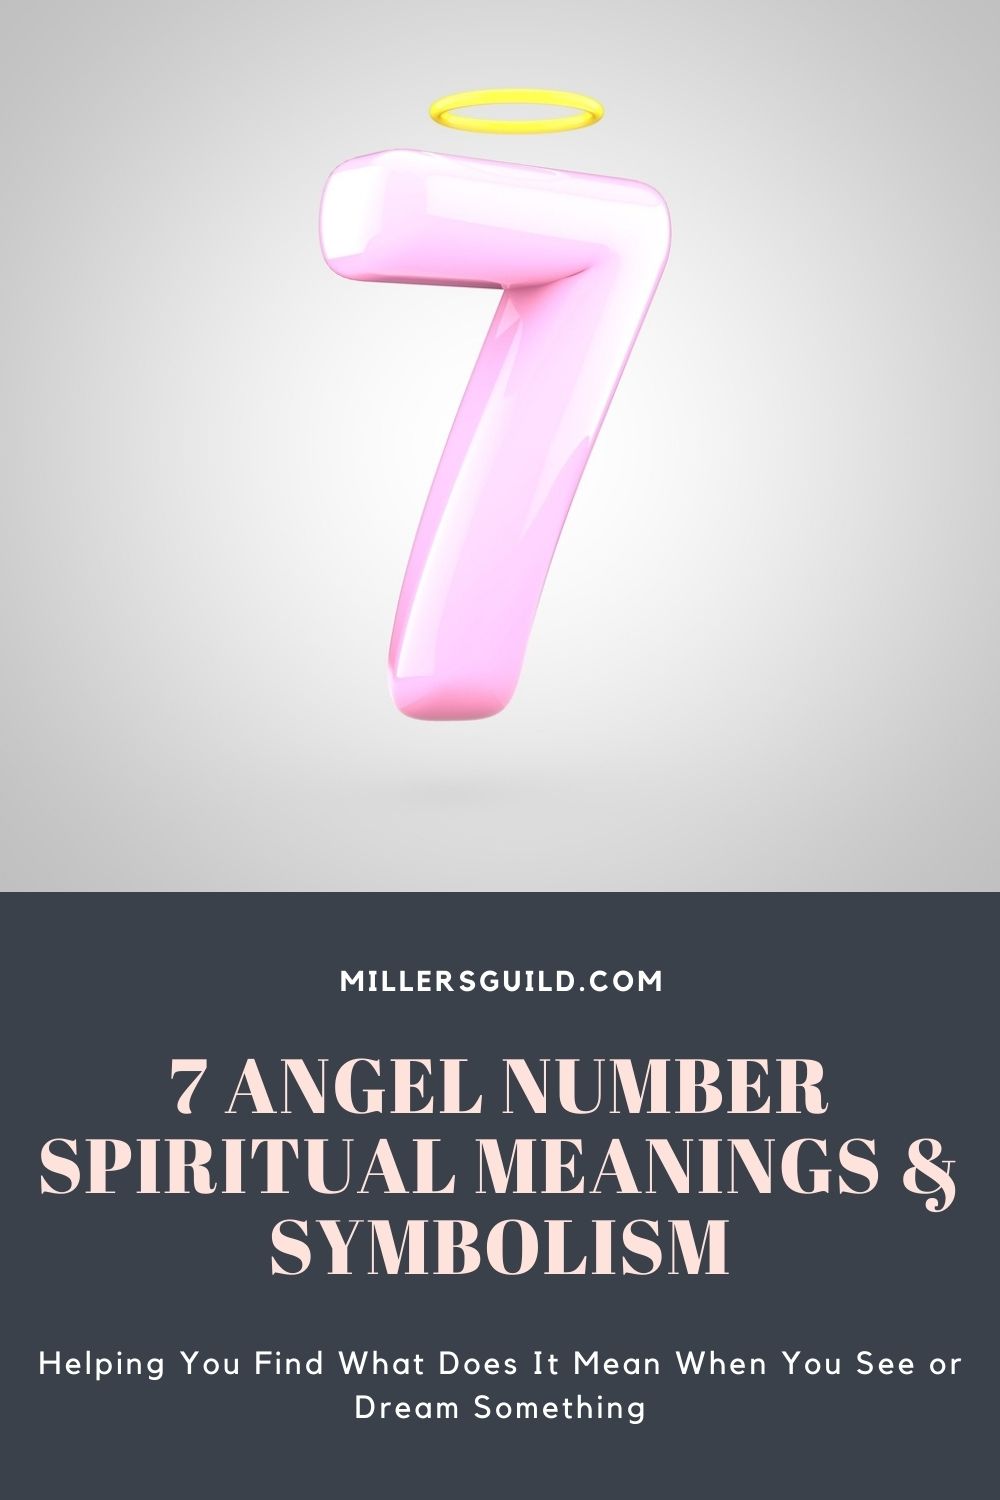 7 Angel Number Spiritual Meanings & Symbolism 2